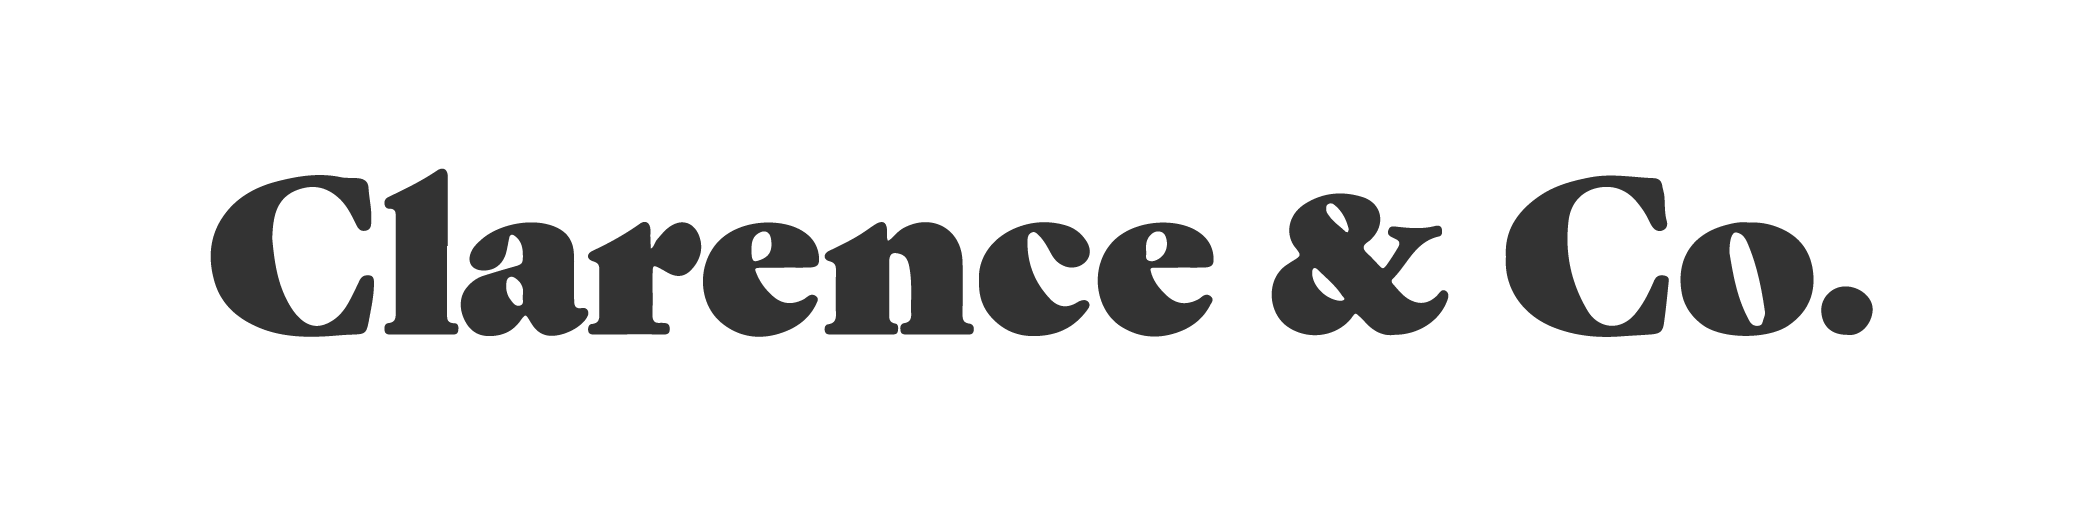 CLARENCE & CO logo.png